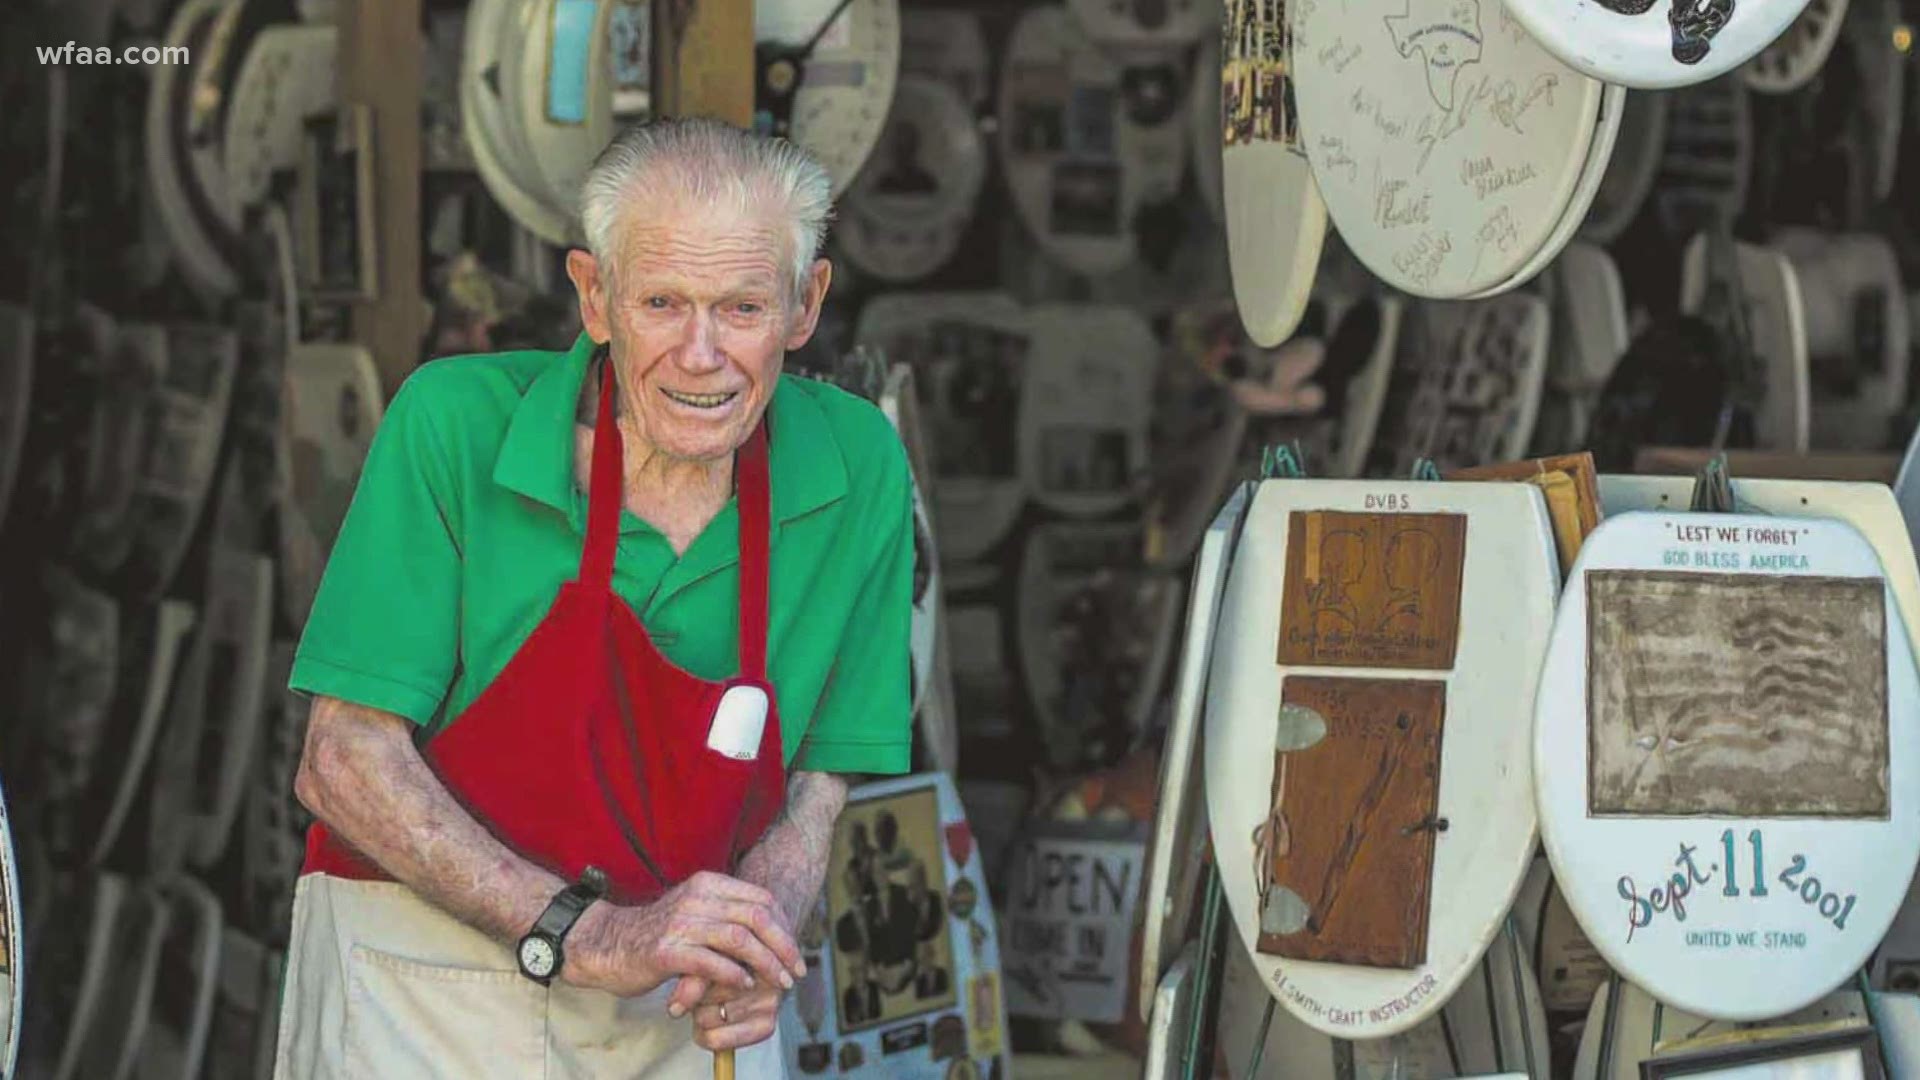 One of the strangest museums anywhere in the state exists only because one Texas man made it his lifelong mission to collect toilet seats.